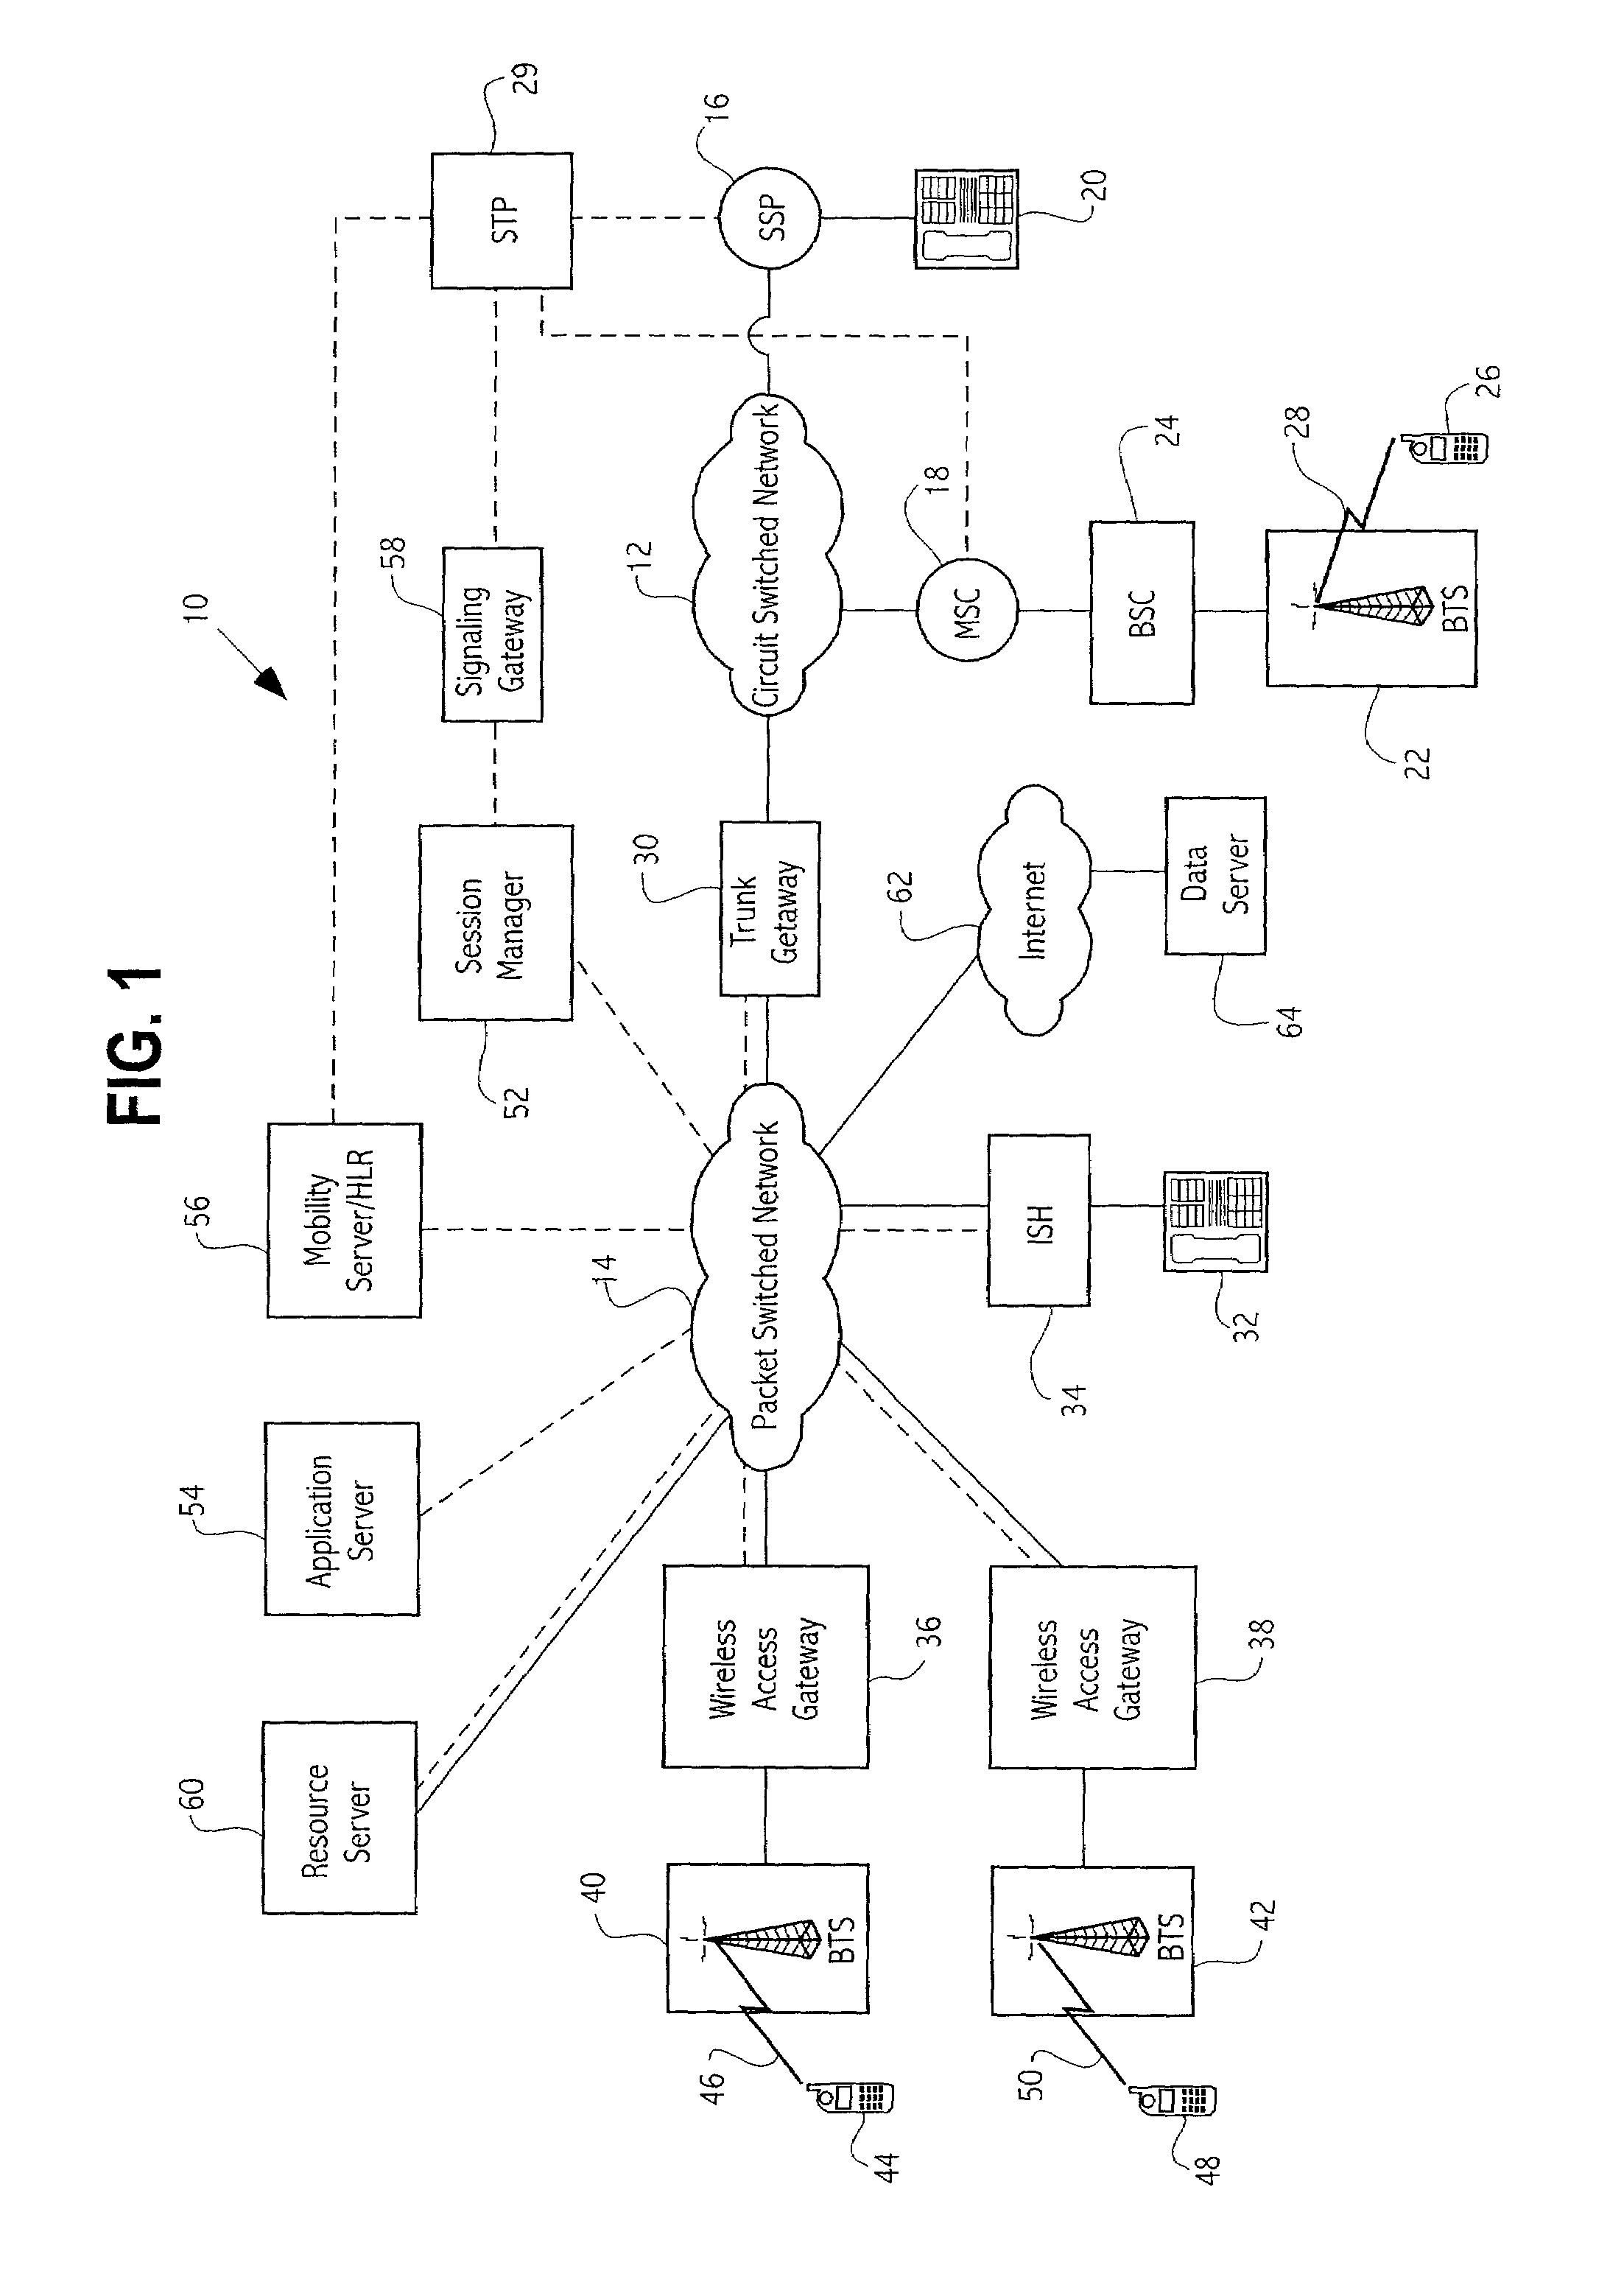 Wireless access gateway to packet switched network